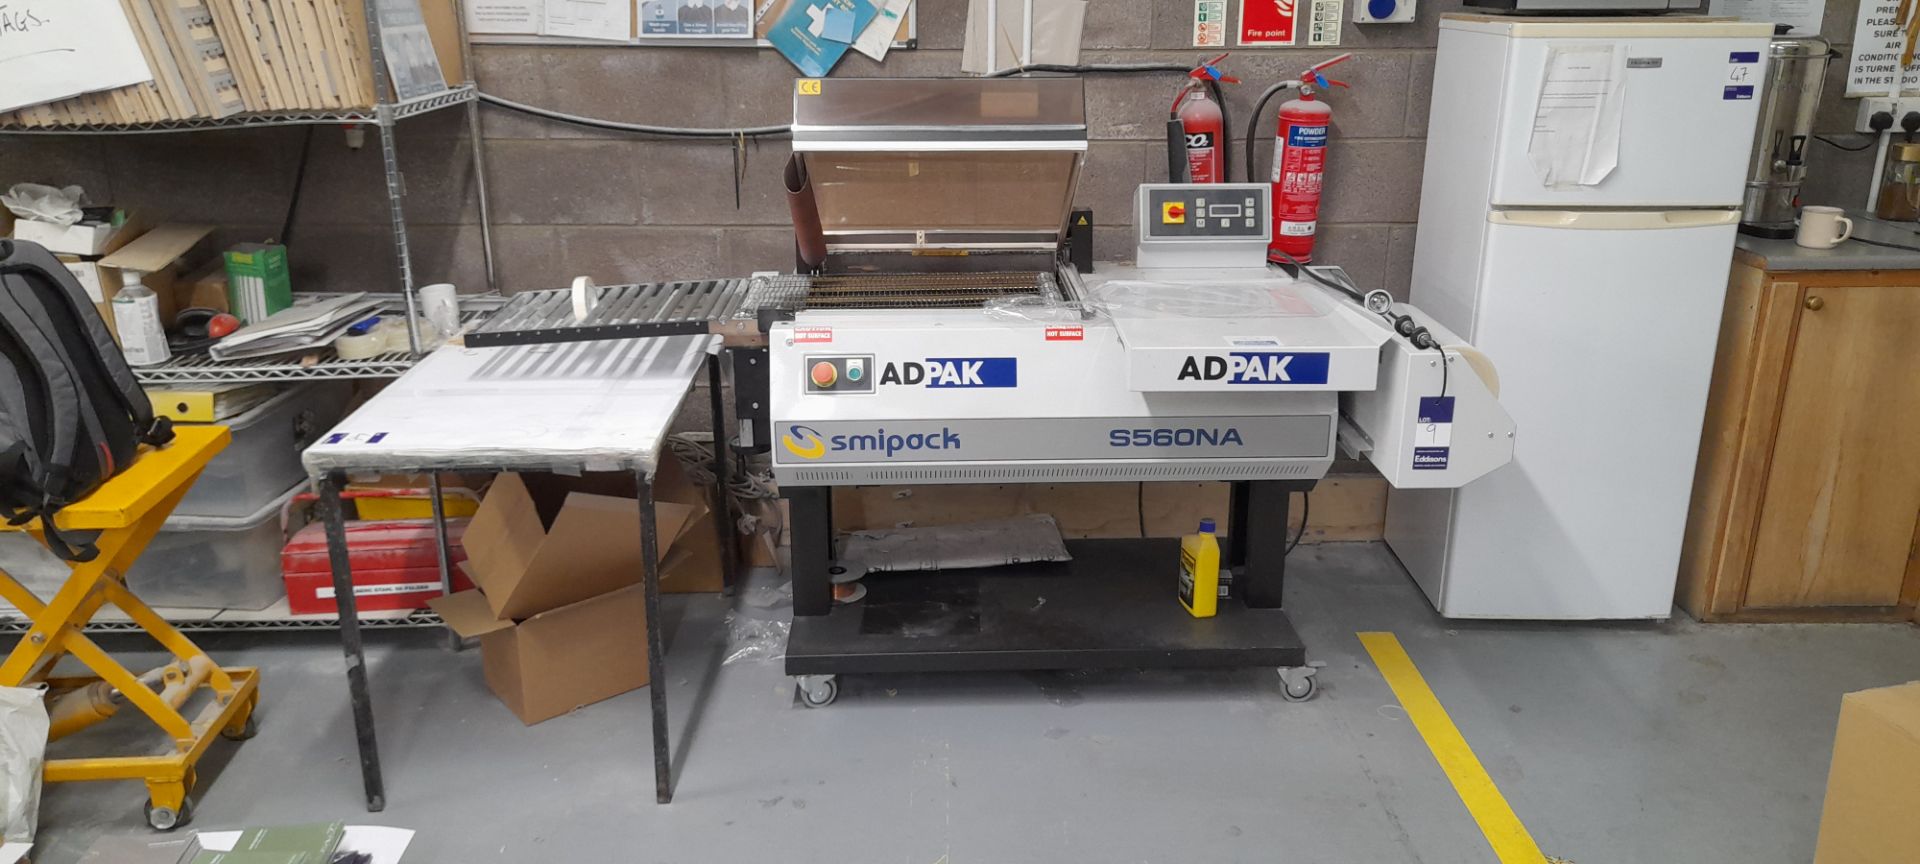 Adpak Smipack S560NA heat sealer, Serial number 10400 (2014). To be disconnected by a qualified